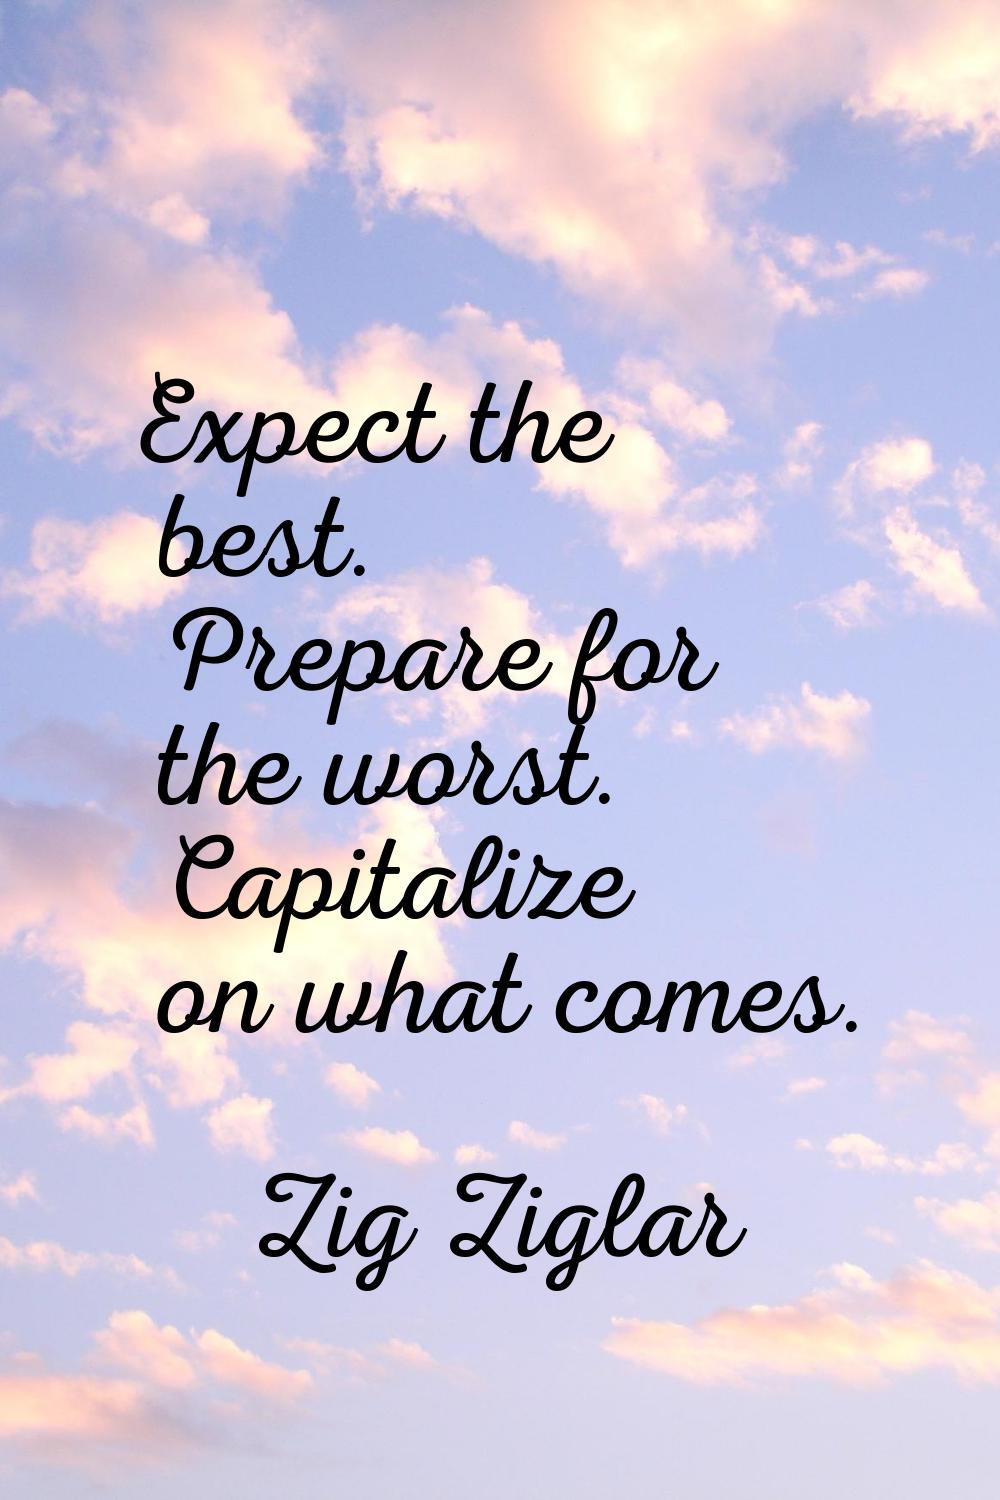 Expect the best. Prepare for the worst. Capitalize on what comes.